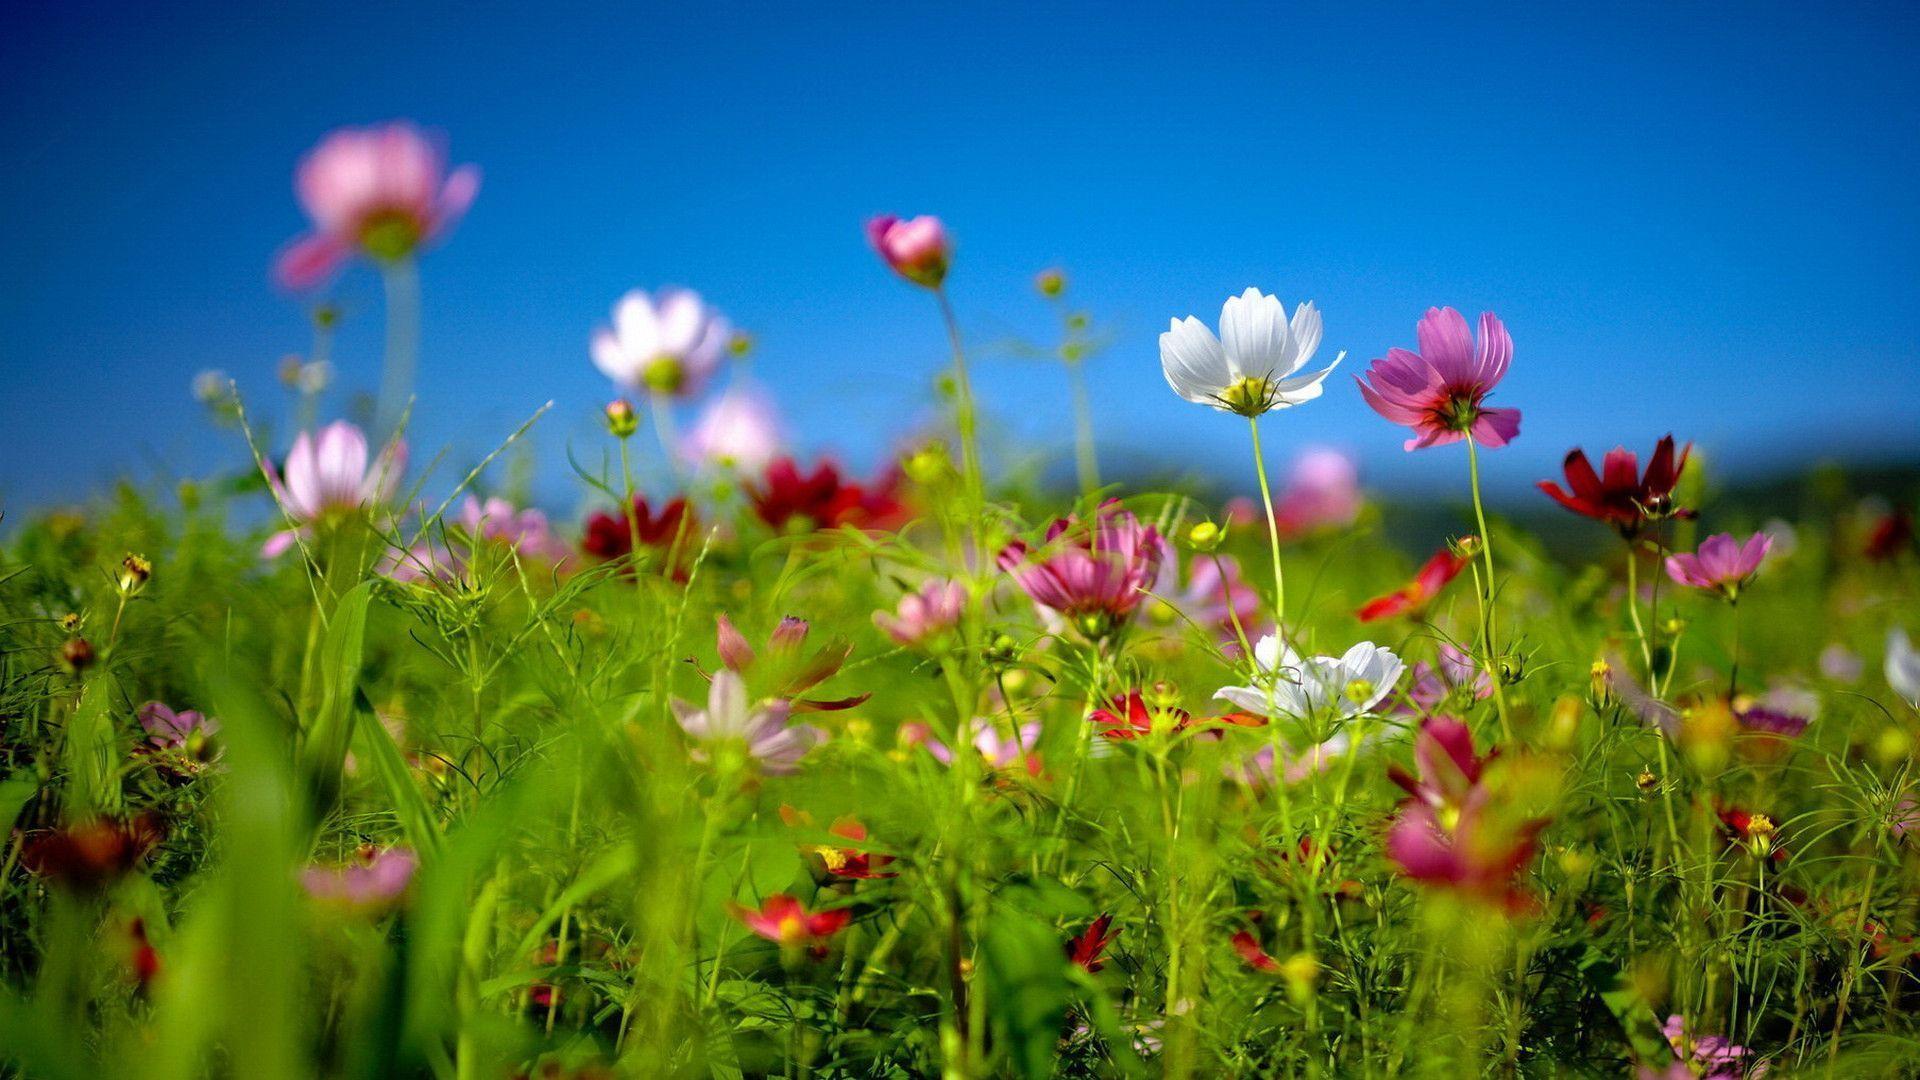 Spring wildflowers Windows 7 Theme and Wallpaper. Download